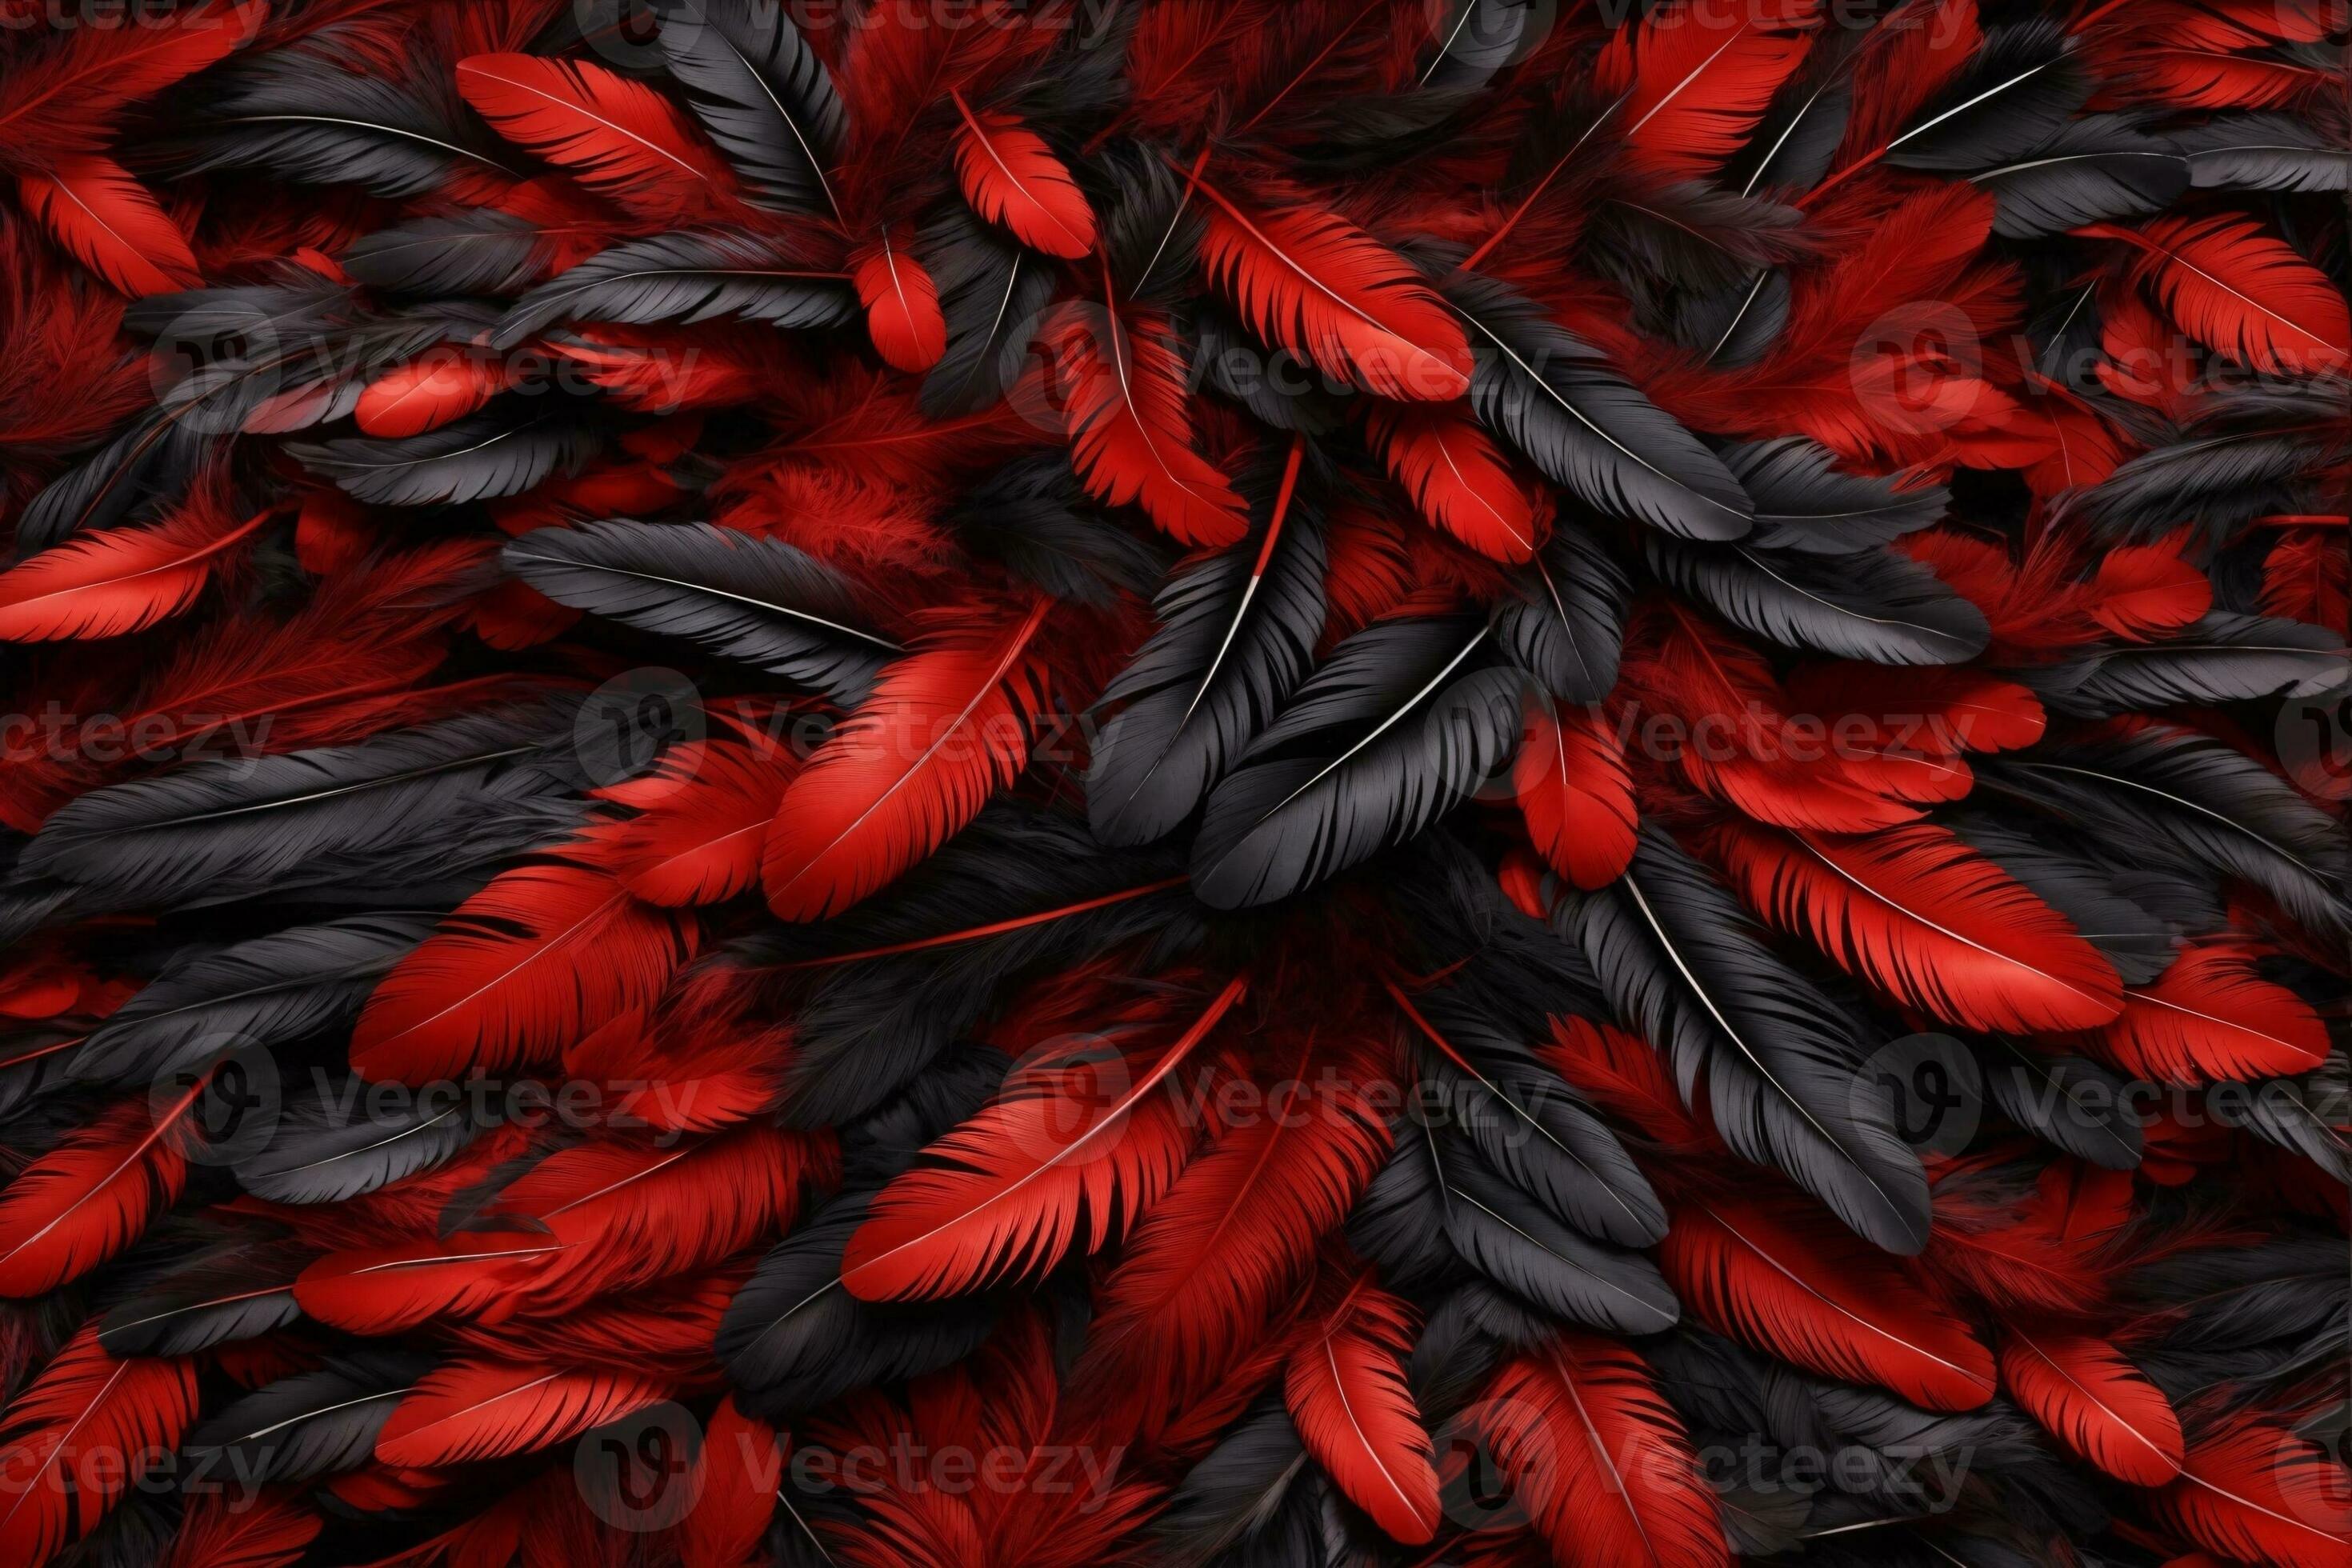 Download Red Feather wallpaper by Electric Art - 7e - Free on ZEDGE™ now.  Browse millions of pop…